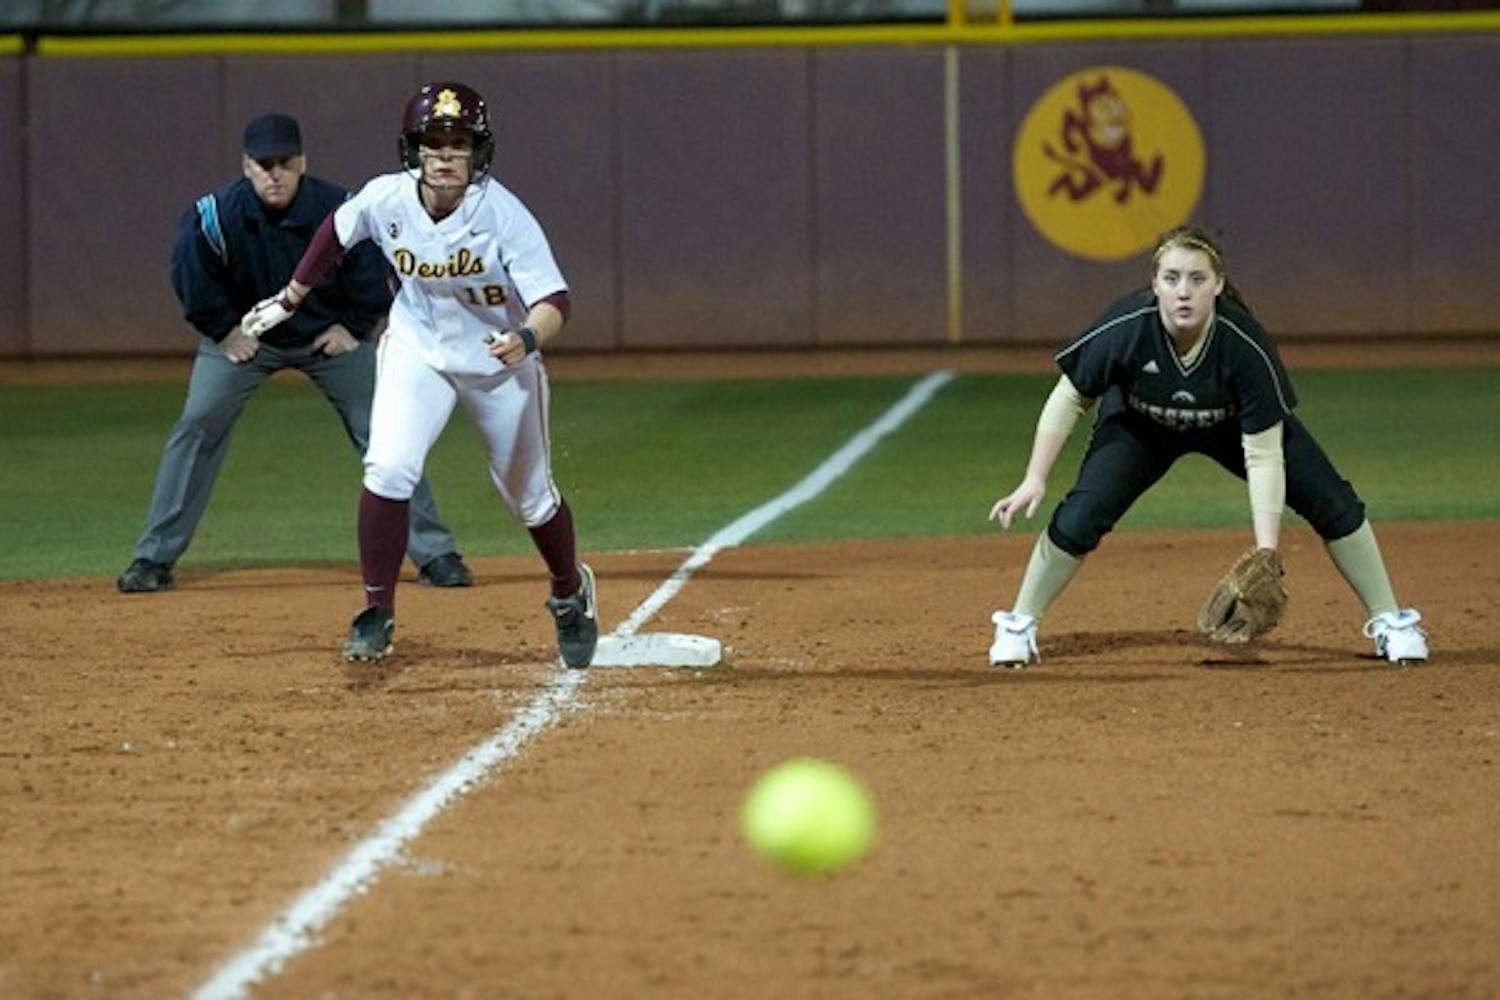 ASU senior middle-infielder Michelle Nulliner gets a jump off third base during the Sun Devils’ season opening victory on Feb. 10. ASU swept the weekend’s Littlewood Classic by run ruling all four opponents. (Photo by Michael Arellano)